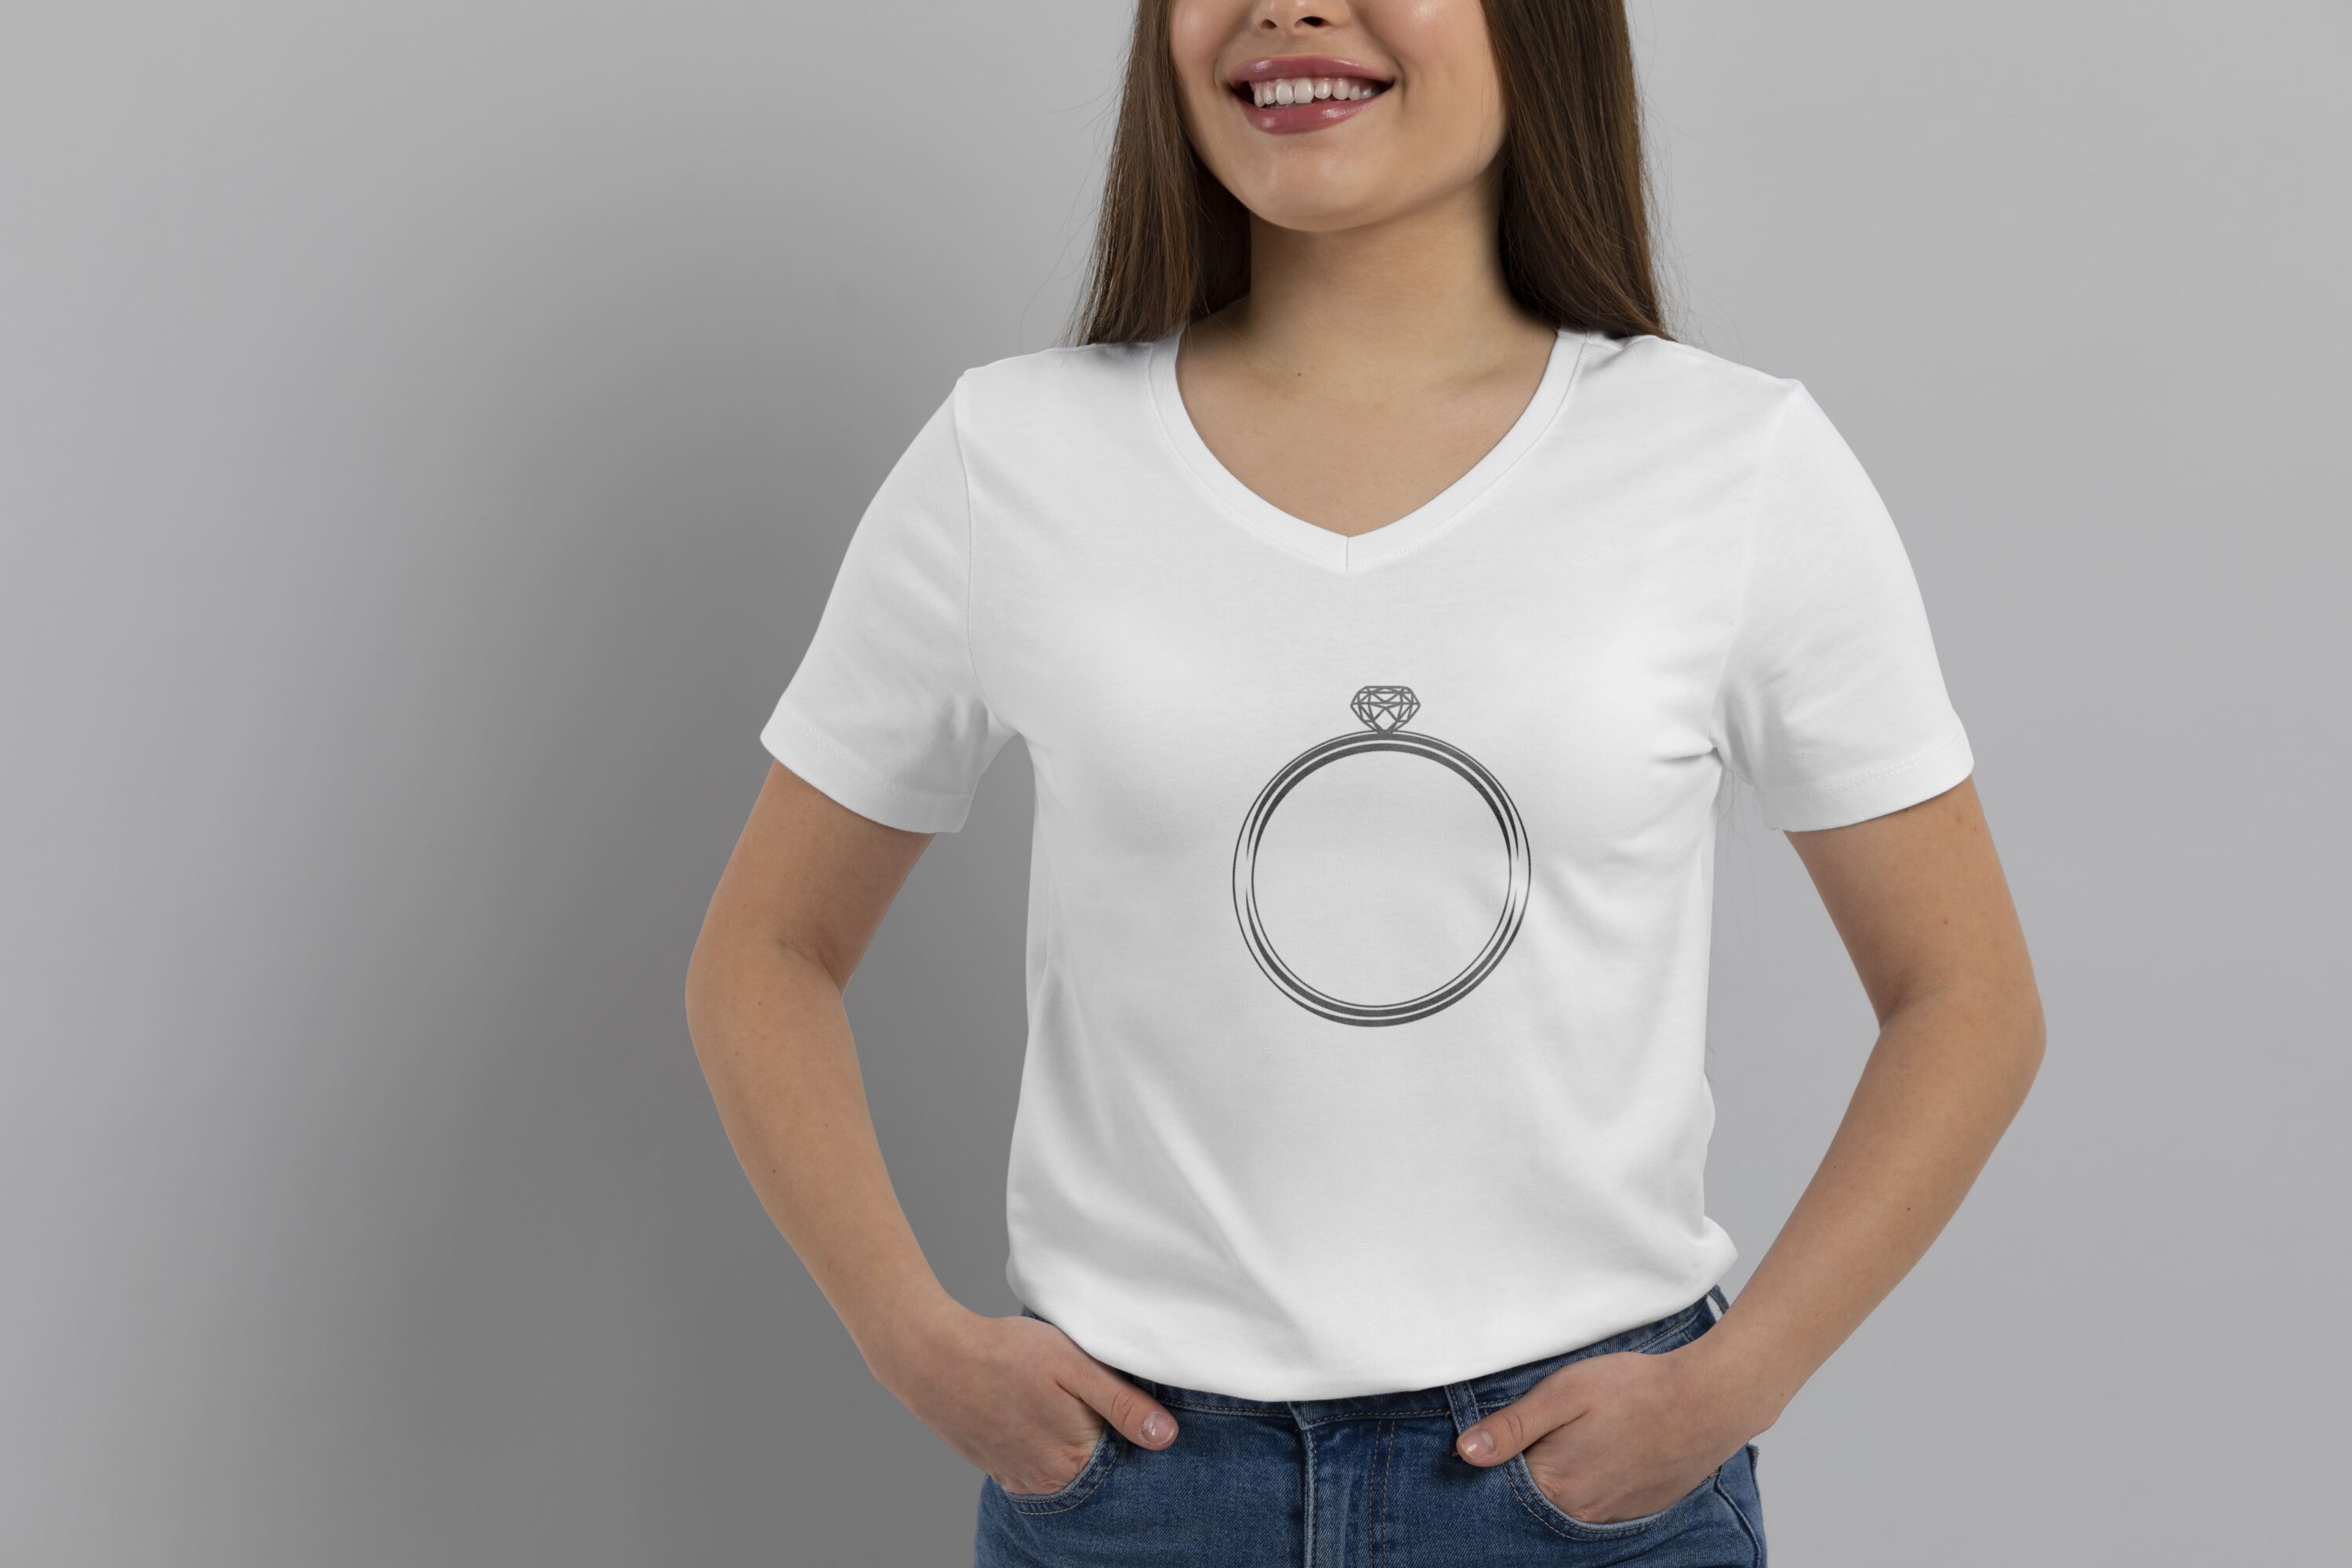 Image of a t-shirt with a charming diamond ring print.